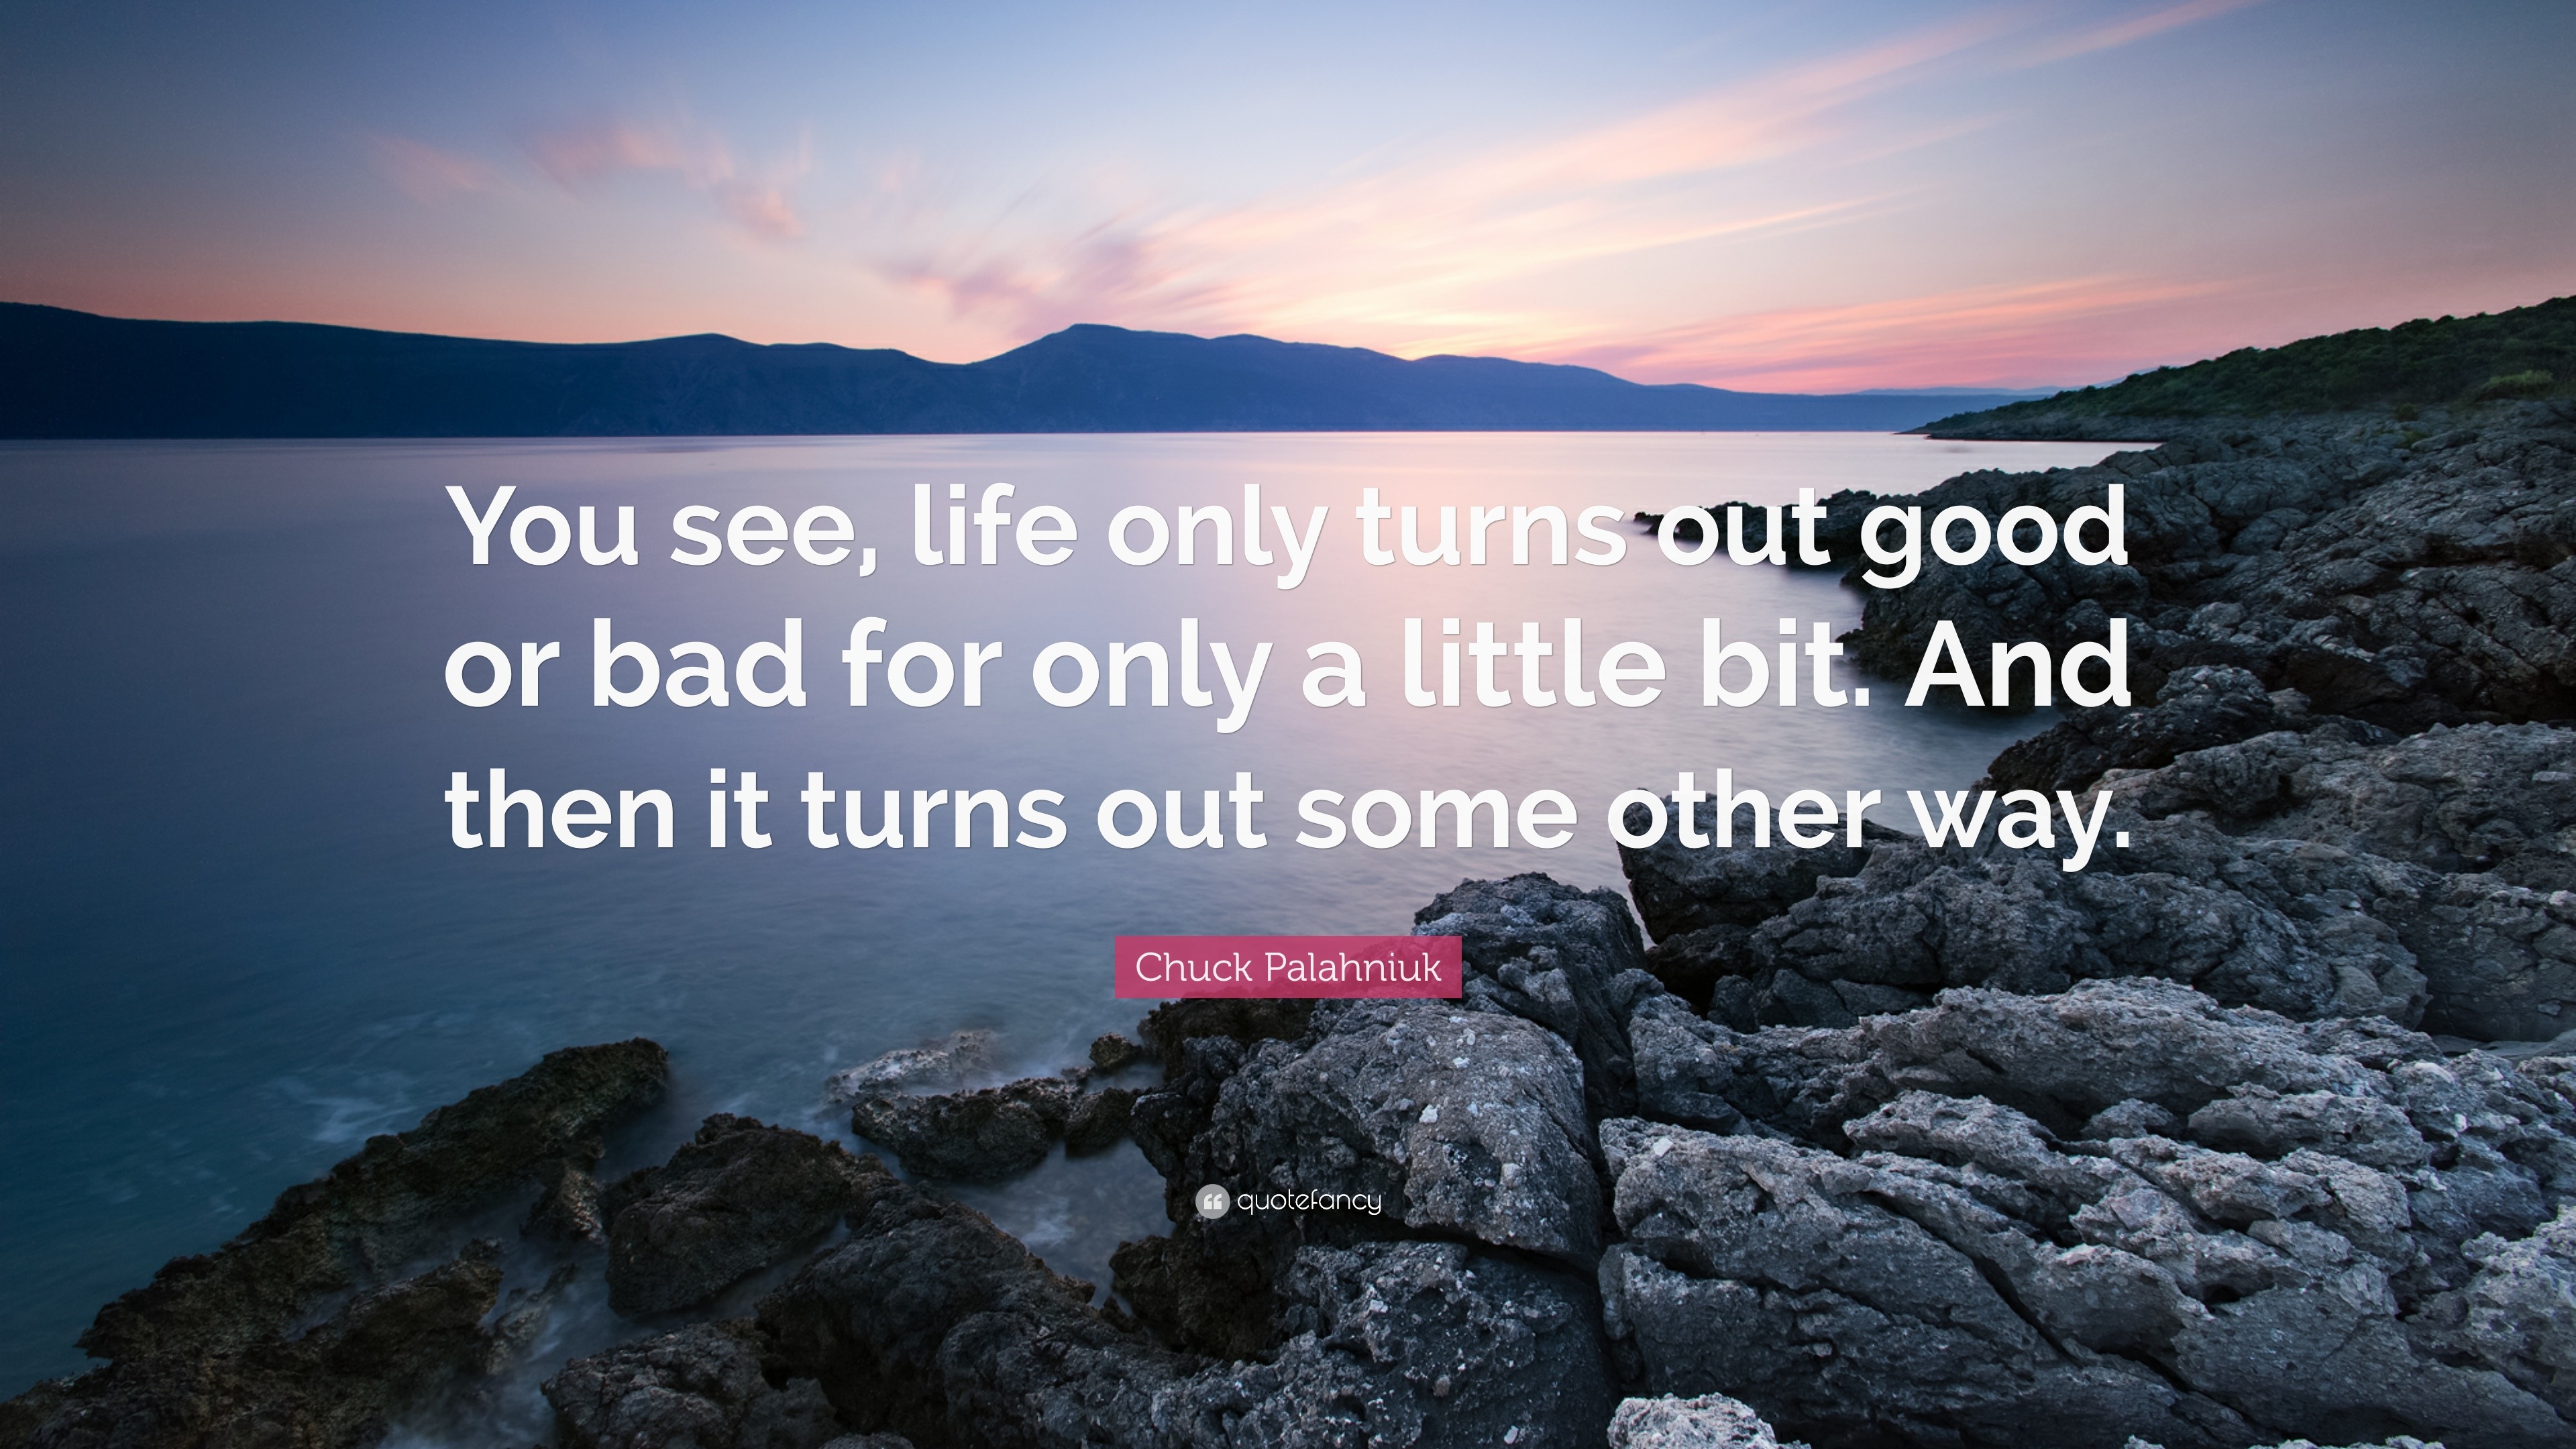 Chuck Palahniuk Quote “You see life only turns out good or bad for